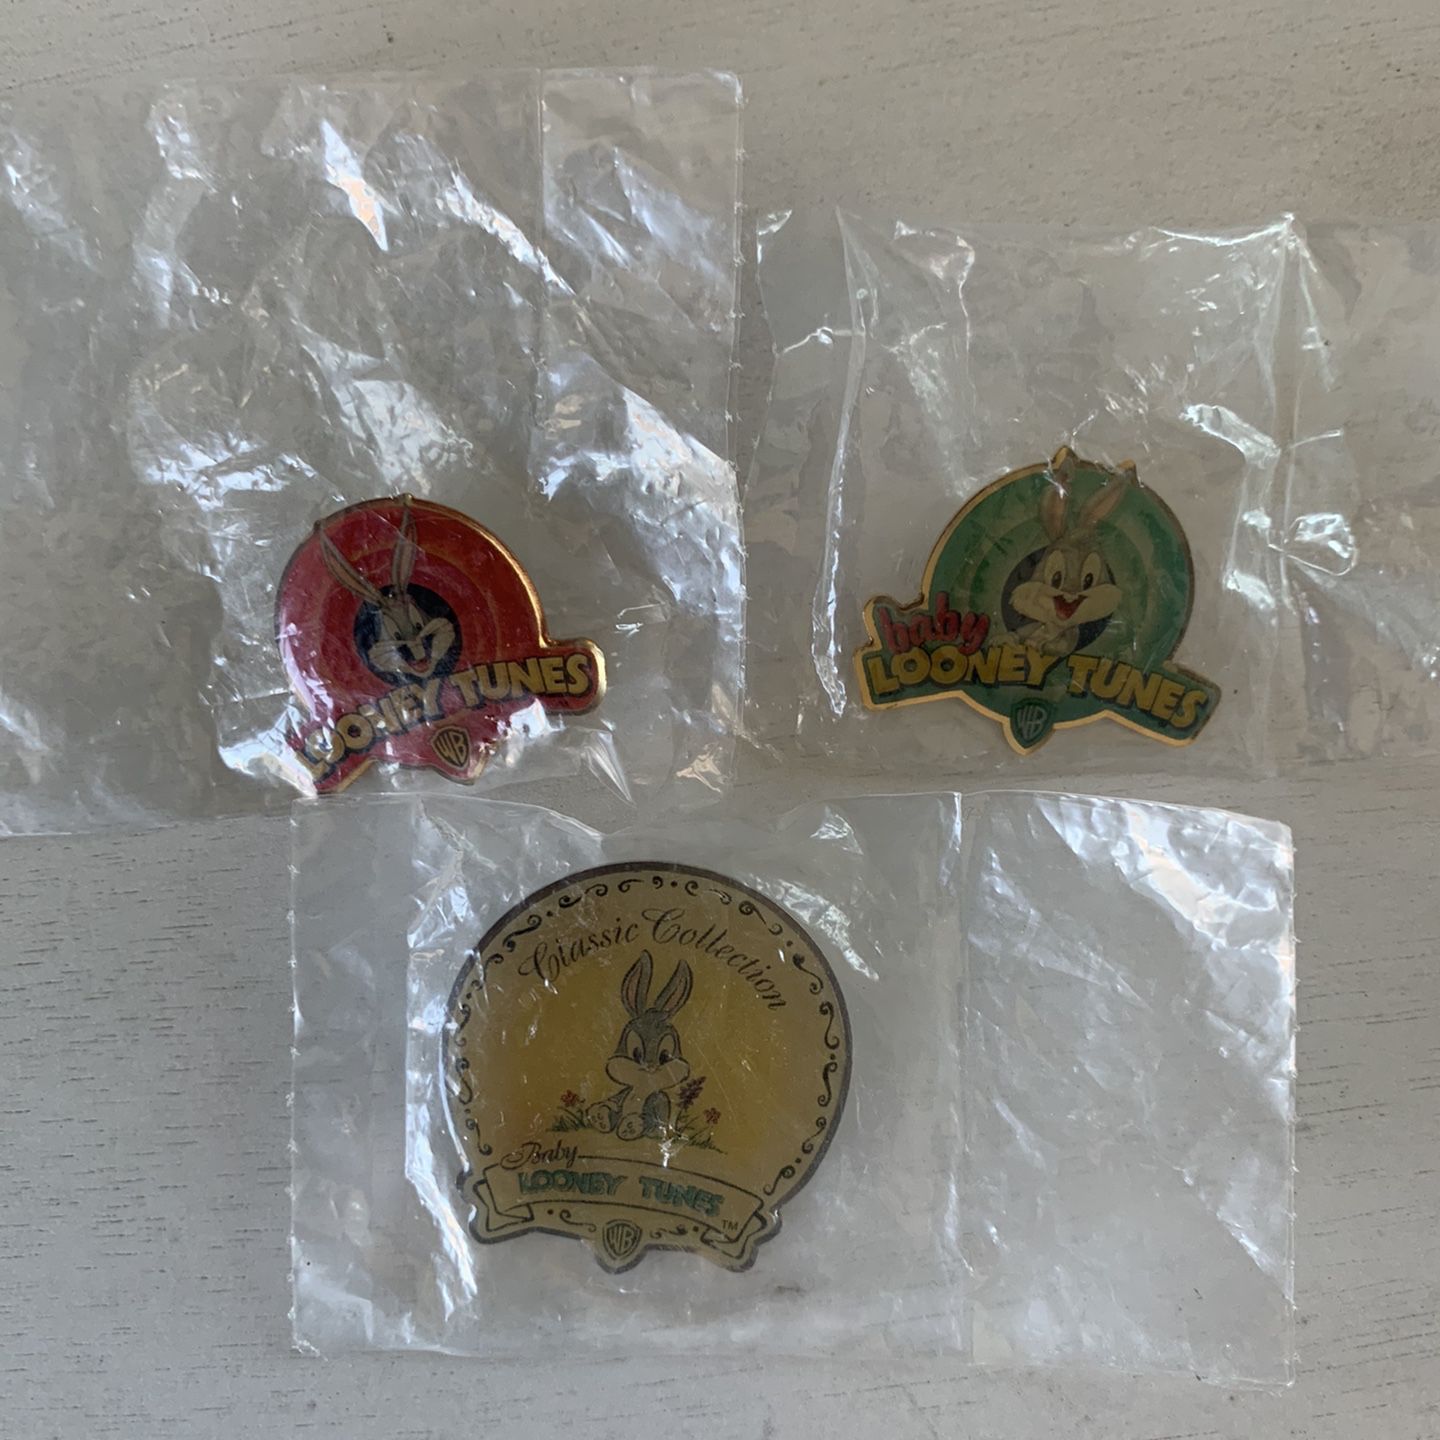 Looney Tunes Collector’s Vintage Pins - Set of 3 from 1997-1998